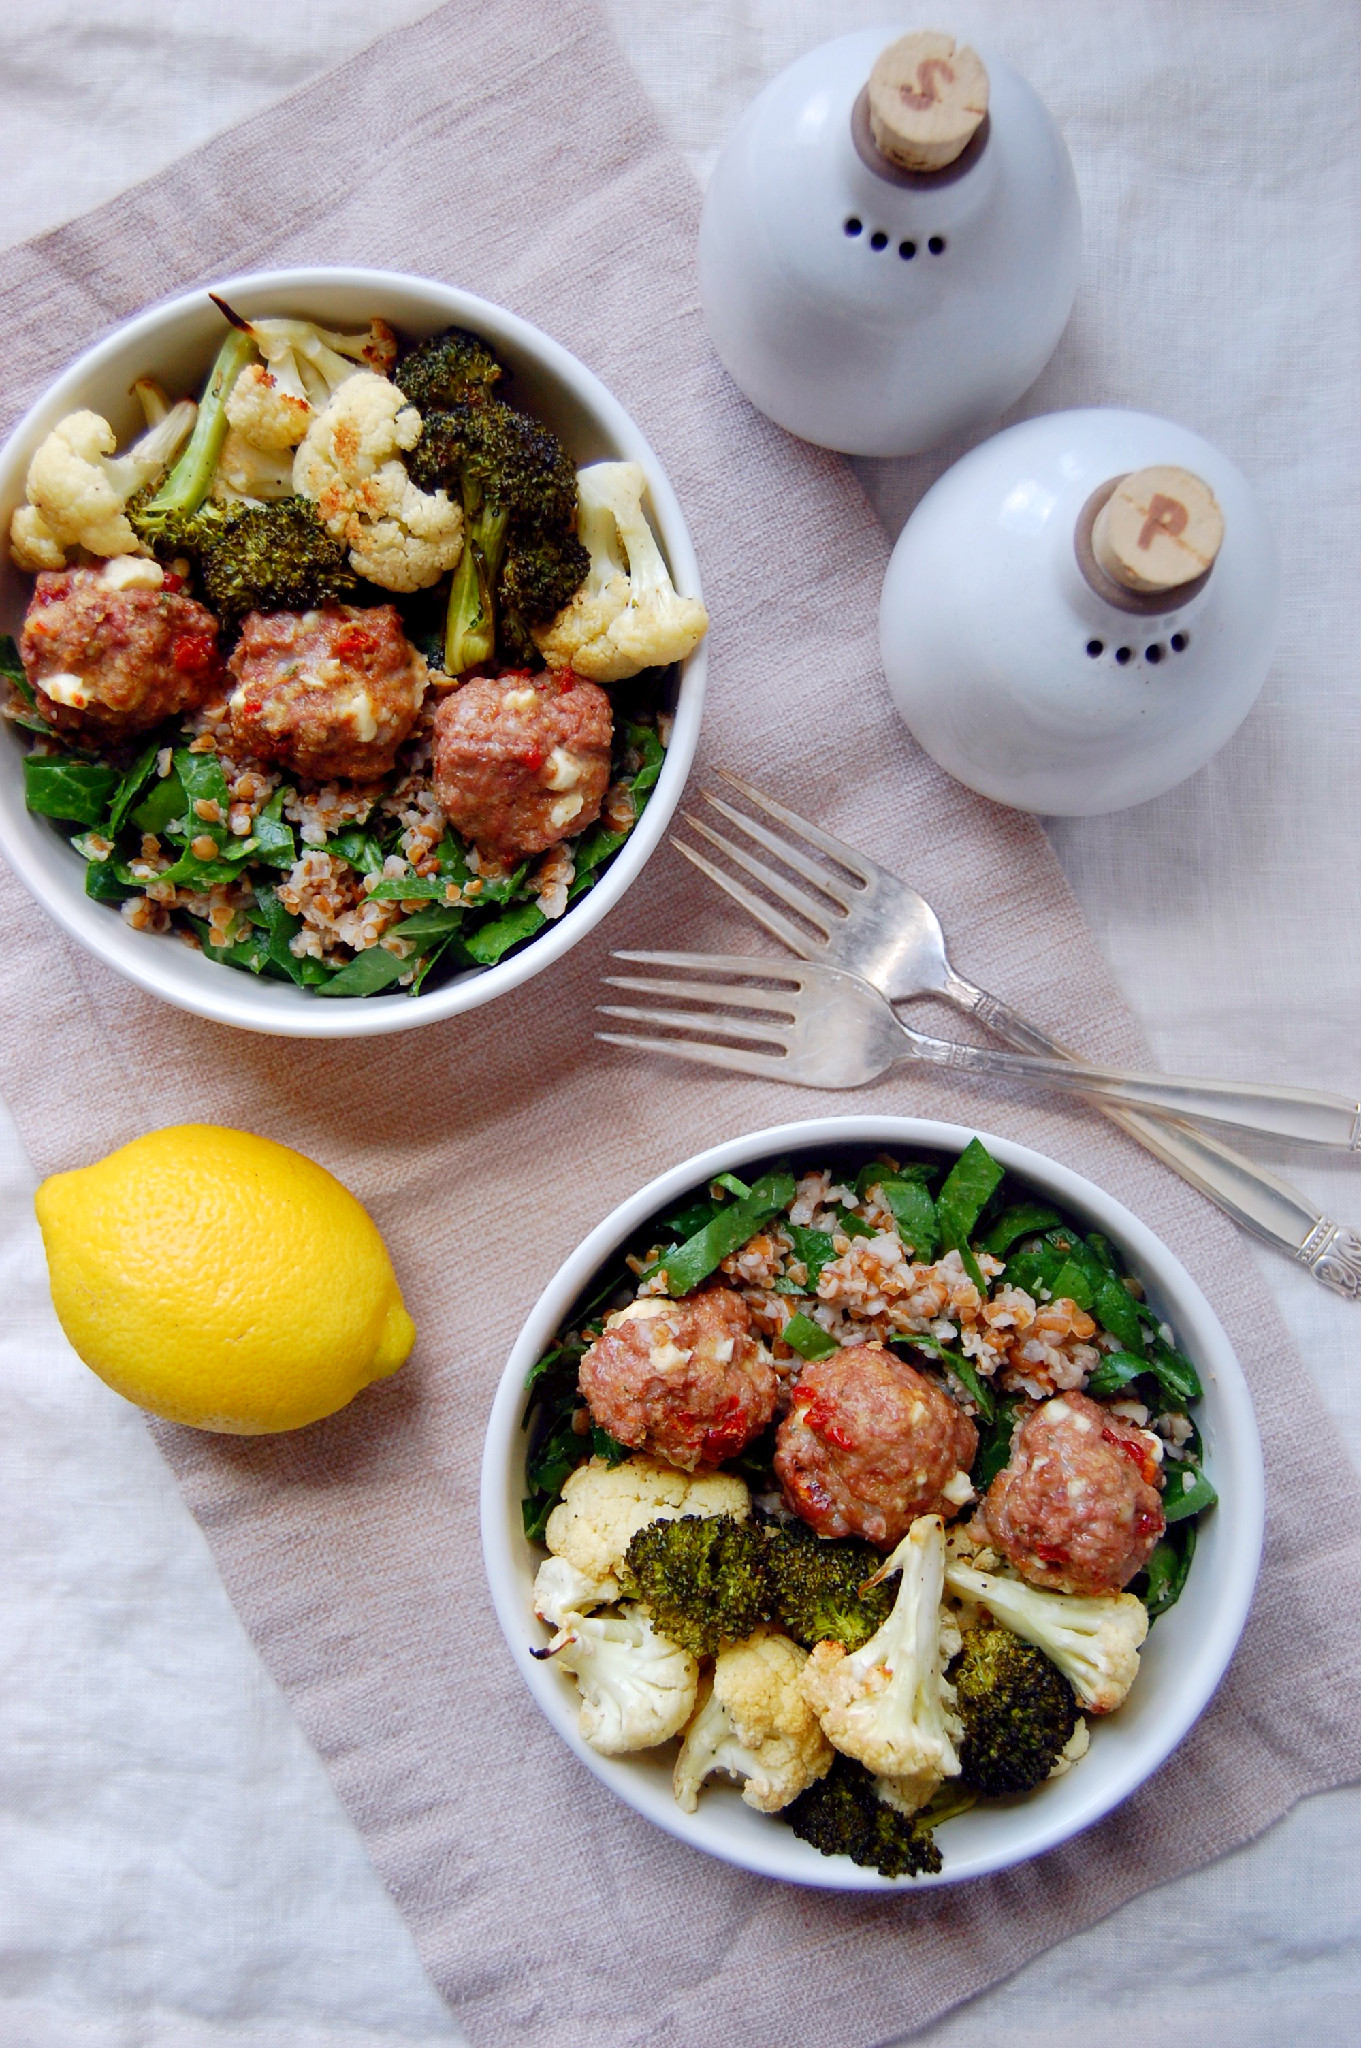 Roasted Vegetable Bulgur Wheat Bowl with Lamb Meatballs - a great spring dinner recipe! | UprootKitchen.com